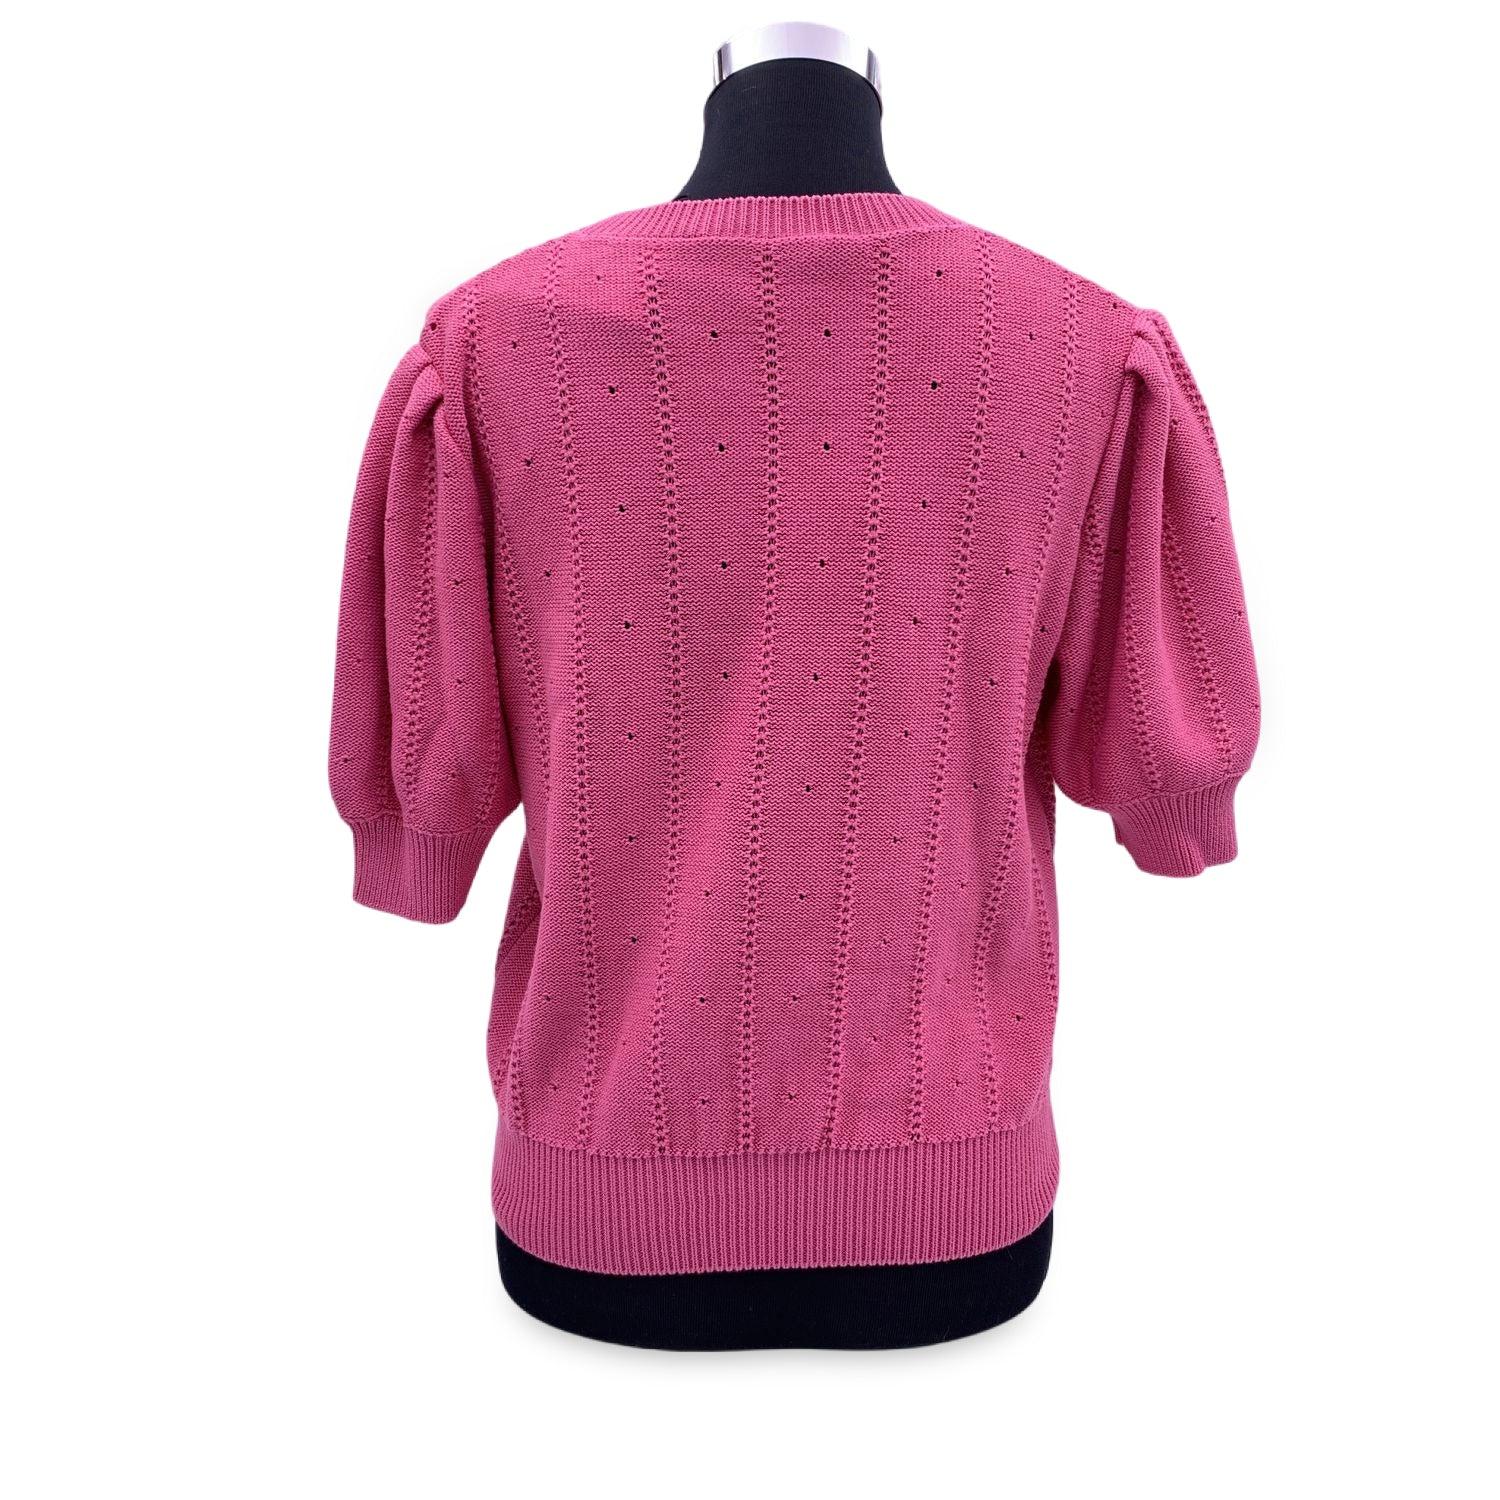 Gucci pink cotton-blend short sleeve sweater. It features pointelle pattern, floral embroidery, crewneck, ribbed collar, cuffs and bottom. Composition: 80% Cotton, 20% Silk. Made in Italy. Size XL. Made in Italy. Retail price is EUR 980 Details